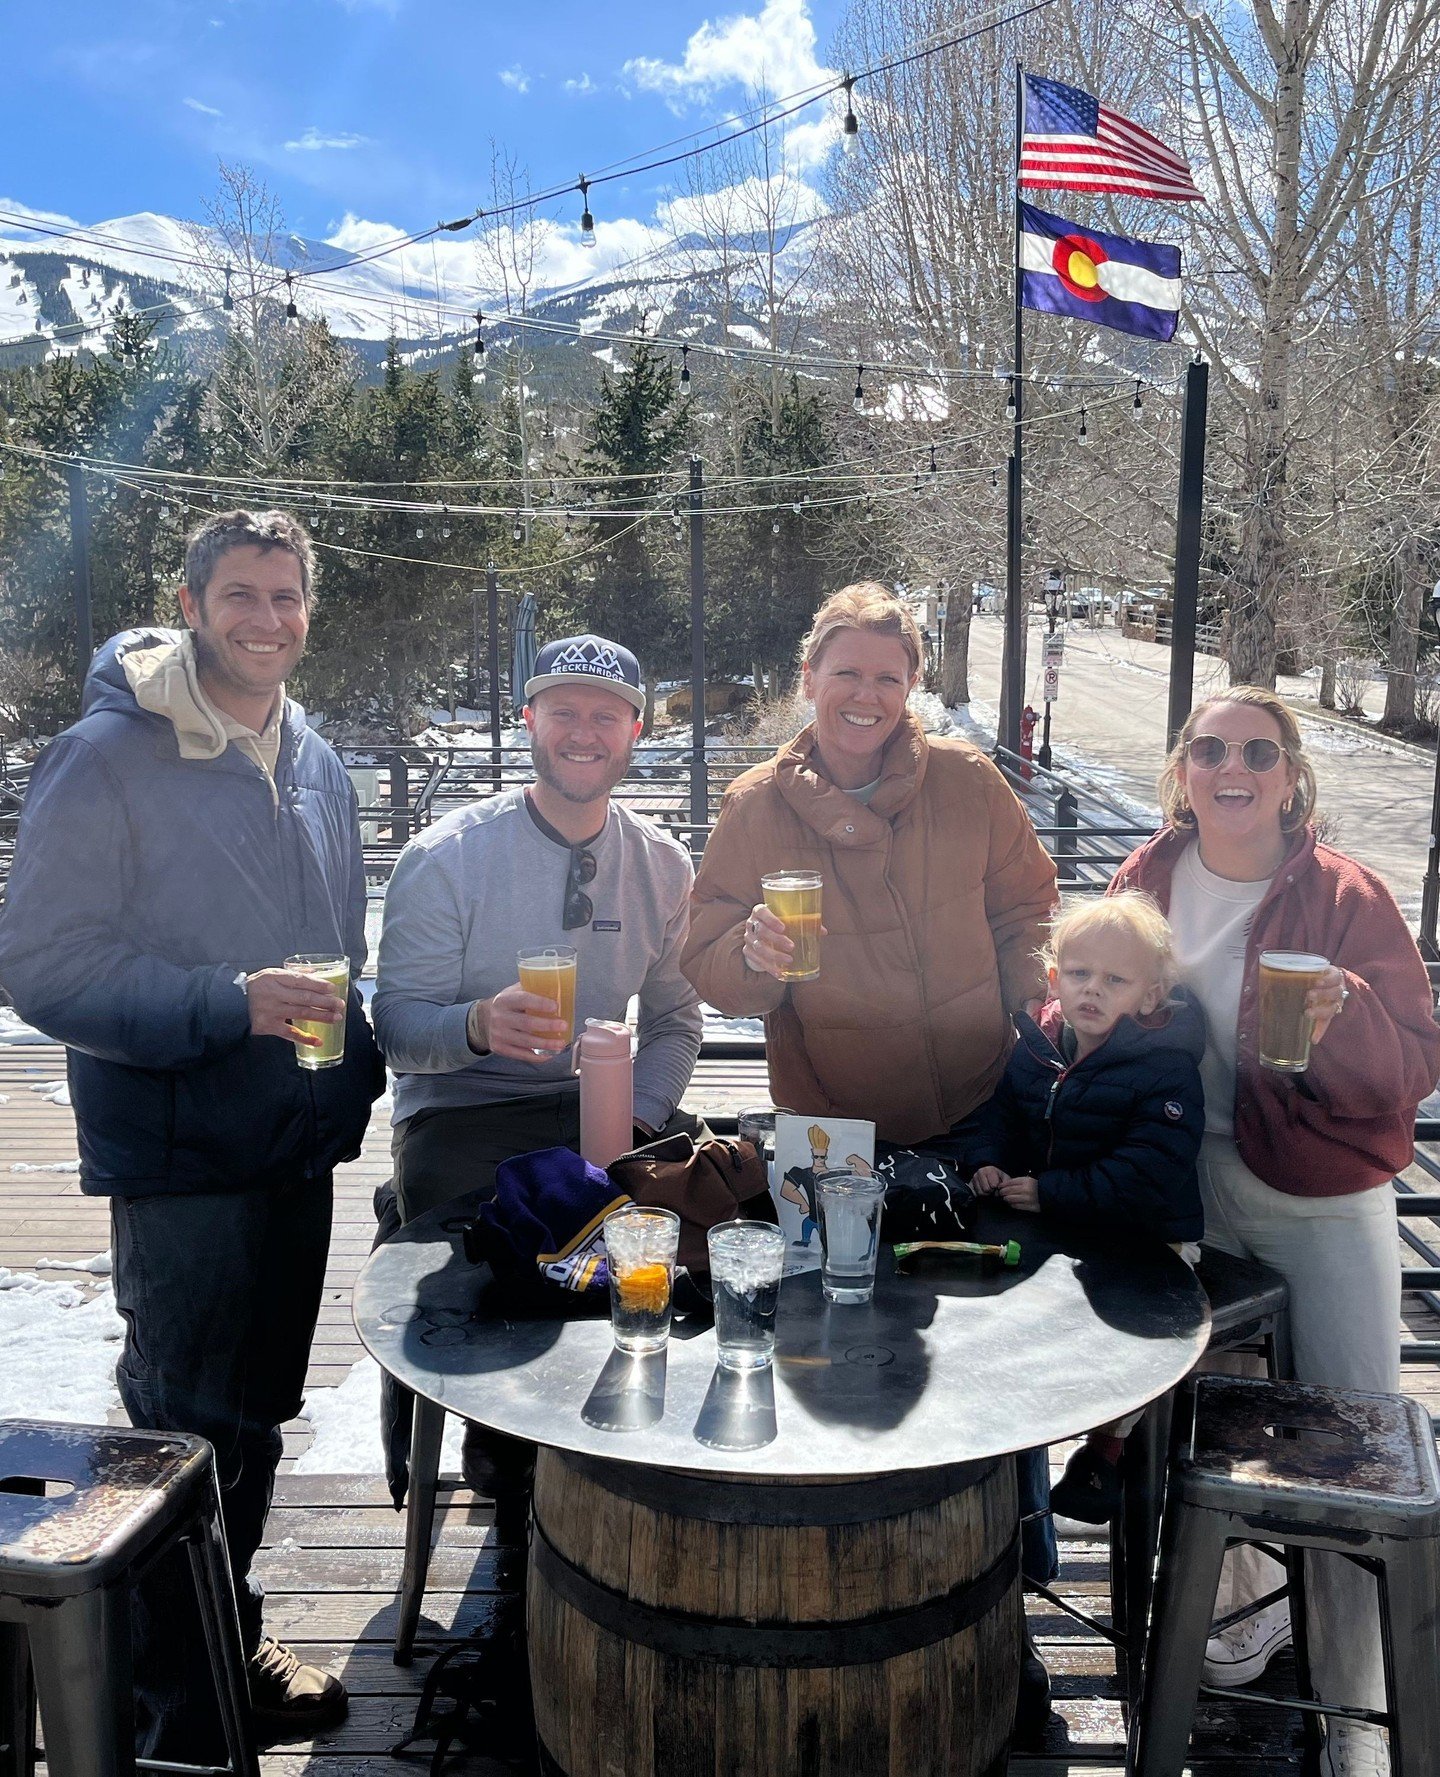 cuties on our team trip to Breckenridge this past weekend! // managed to squeeze in some patio sunshine! We love Spring in the mountains 🌞⁠🍻⁠
-⁠
-⁠
-⁠